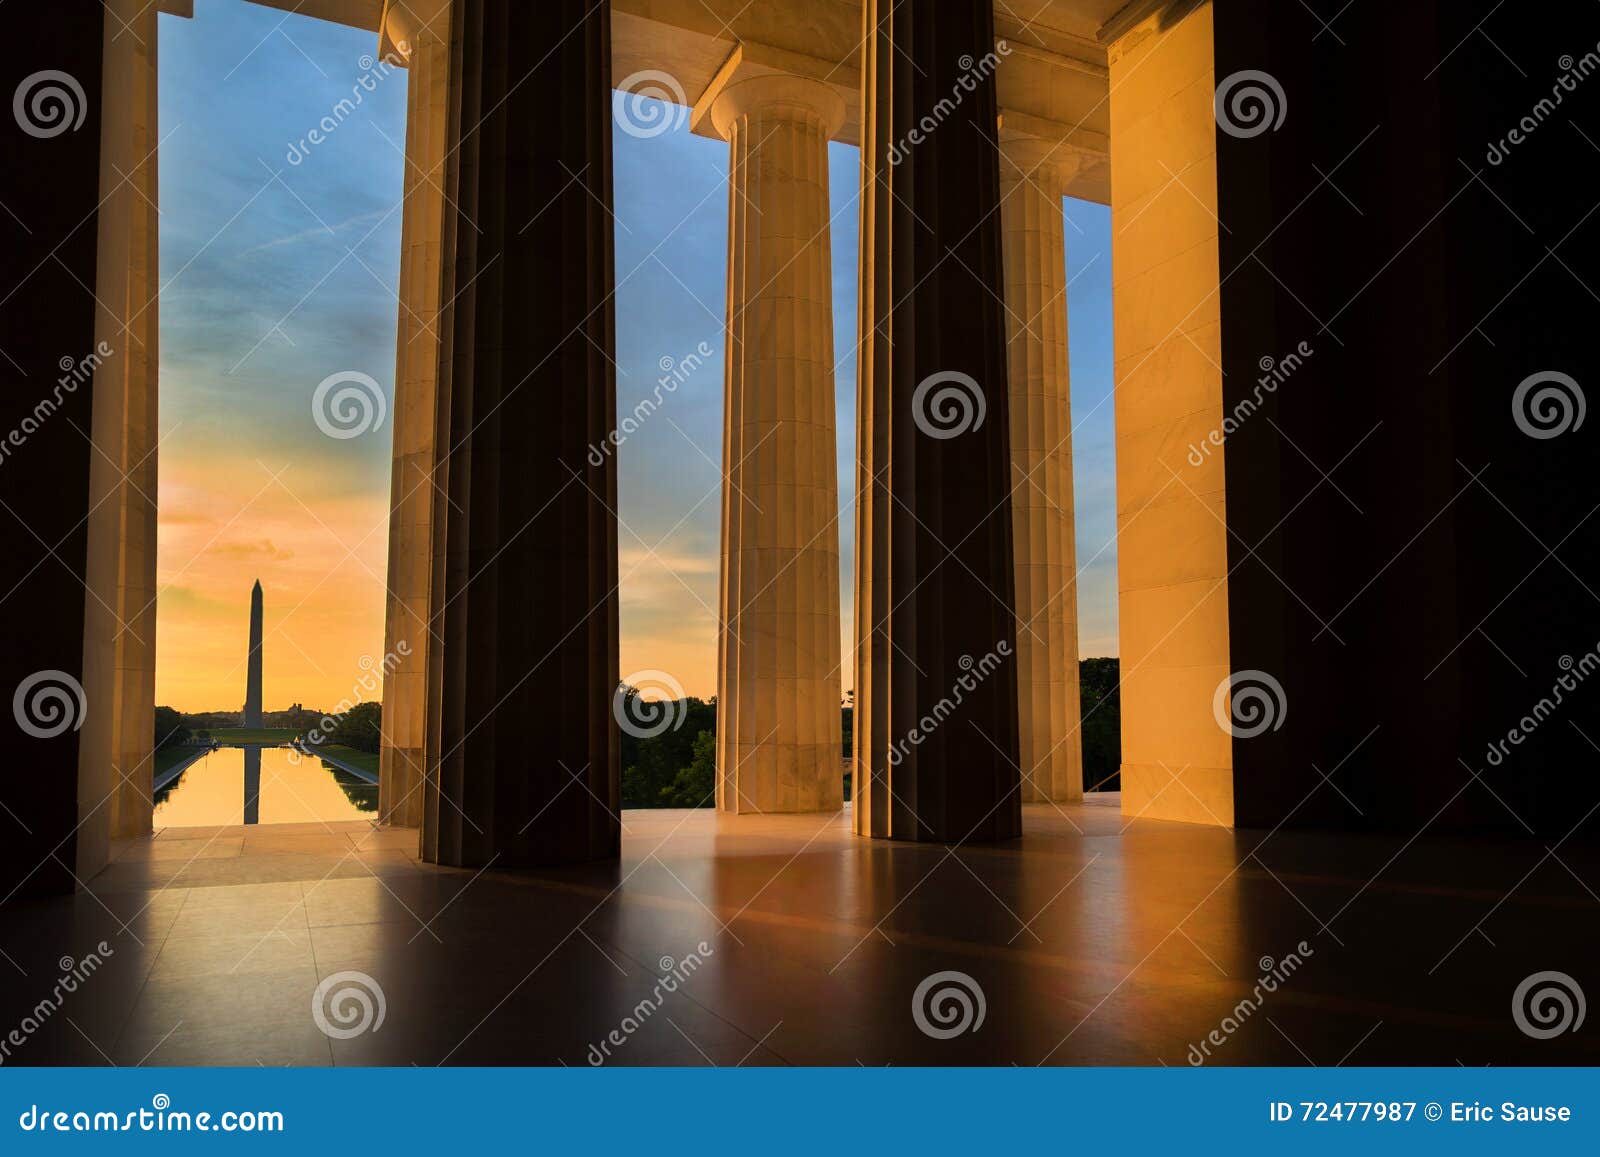 washington monument from lincoln memorial at sunrise in washington, dc